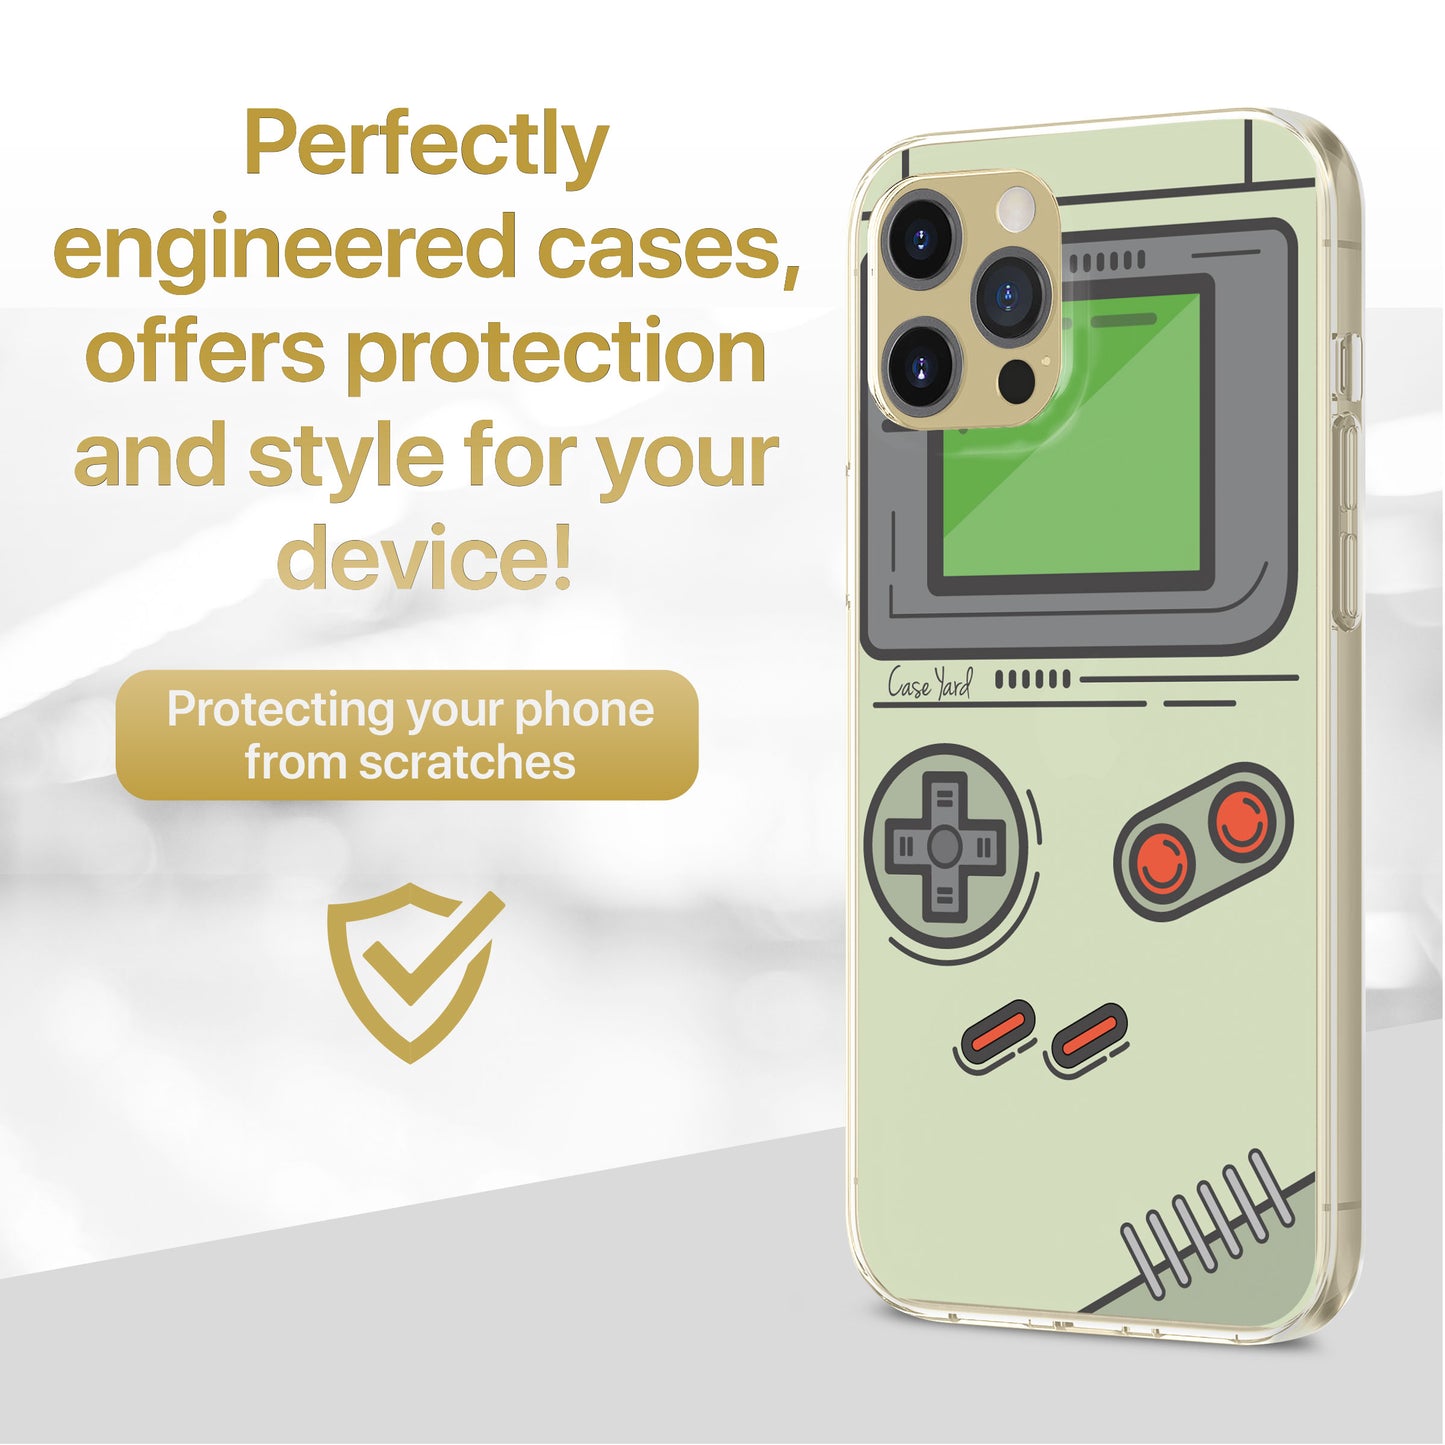 TPU Clear case with (CaseBoy) Design for iPhone & Samsung Phones